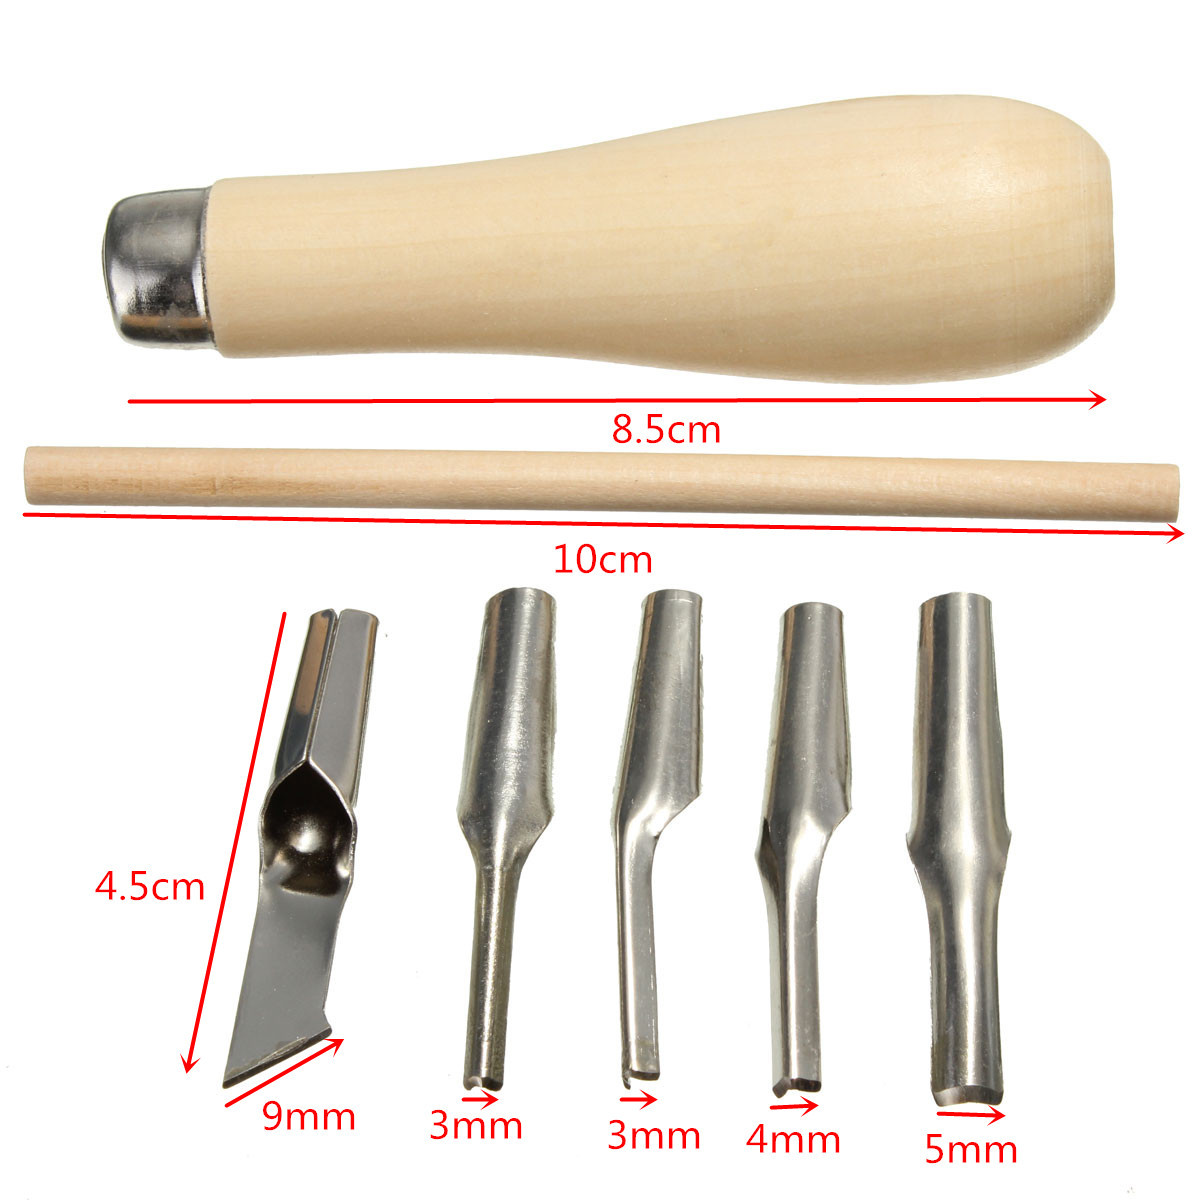 Lino-Block-Cutting-Rubber-Stamp-Carving-Tools-With-5-Blade-Bits-For-Print-Making-1039212-3